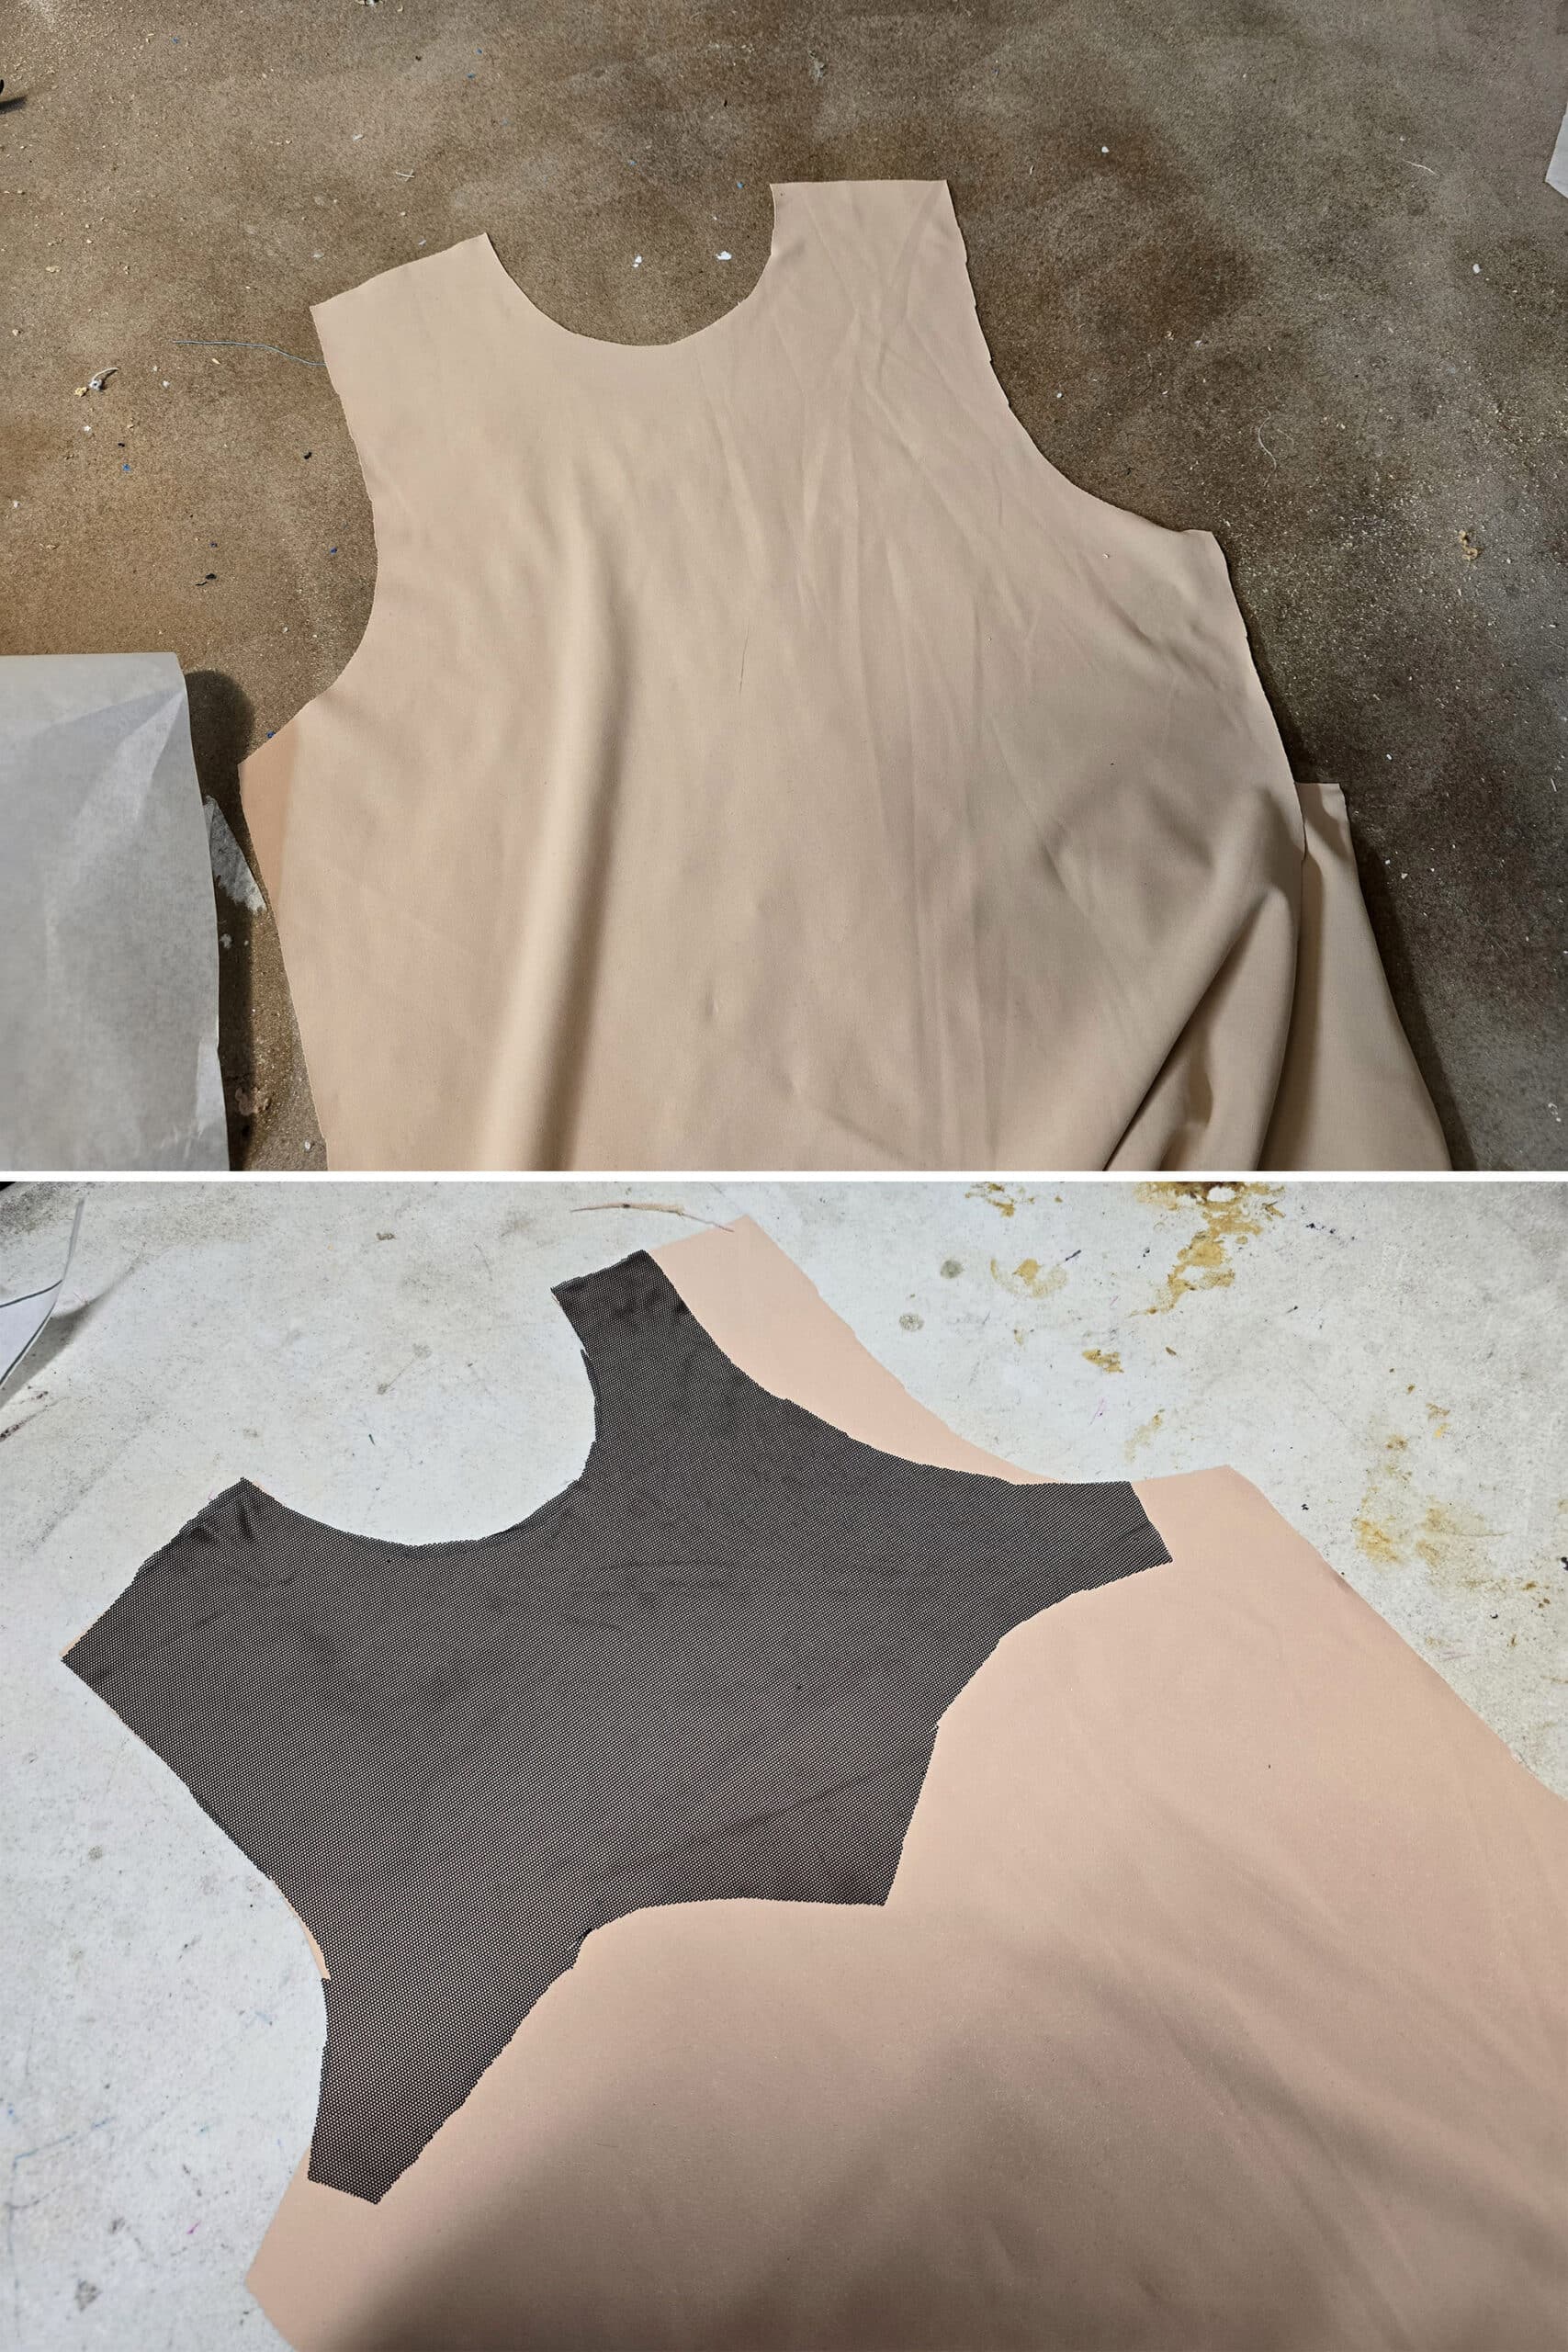 2 part image showing the front mesh part being glued to the lining.